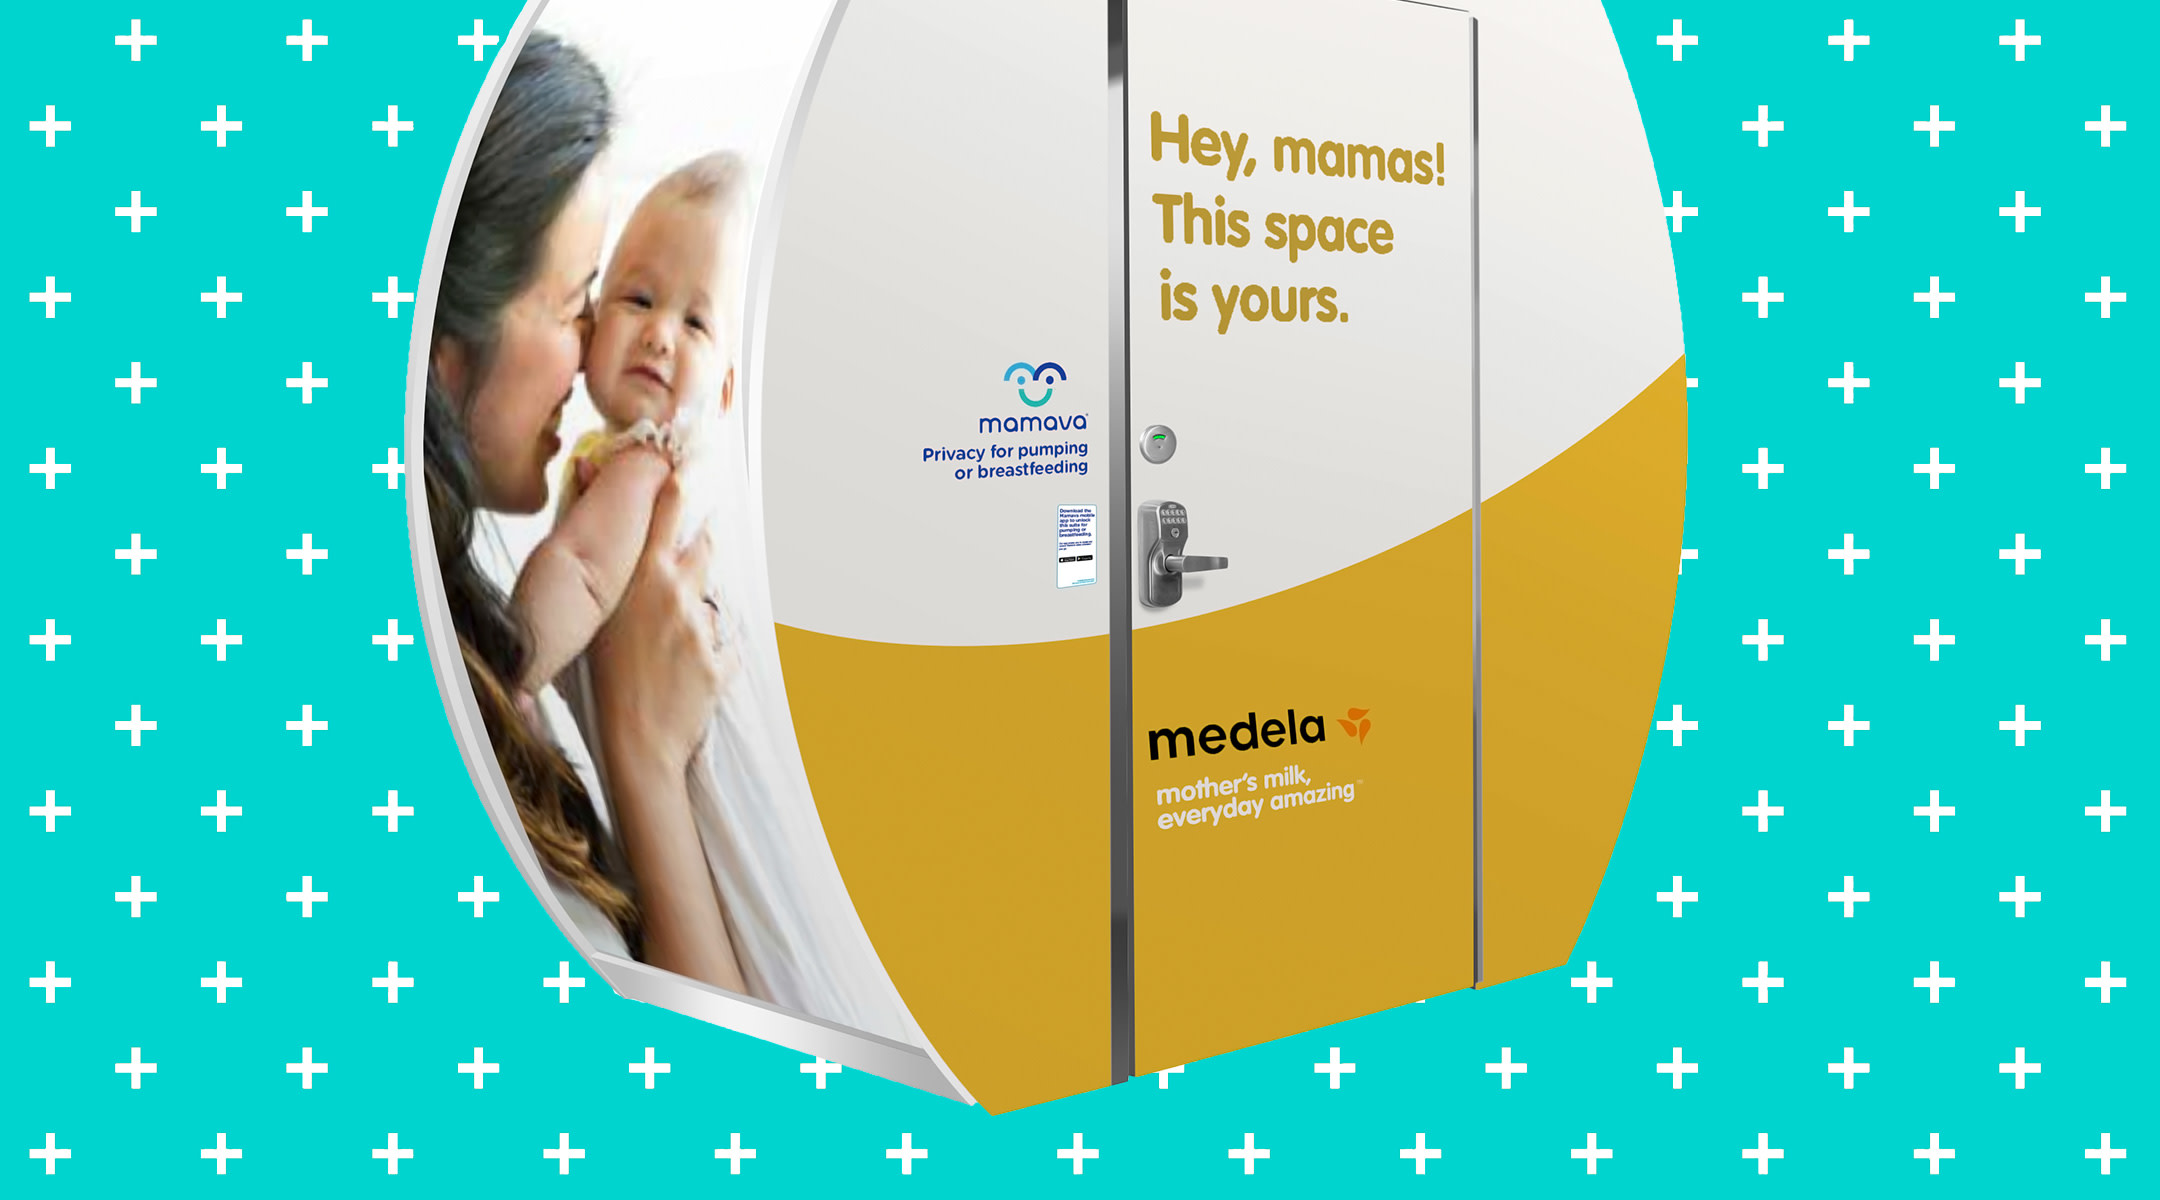 medela and mamava team up to help working breastfeeding moms